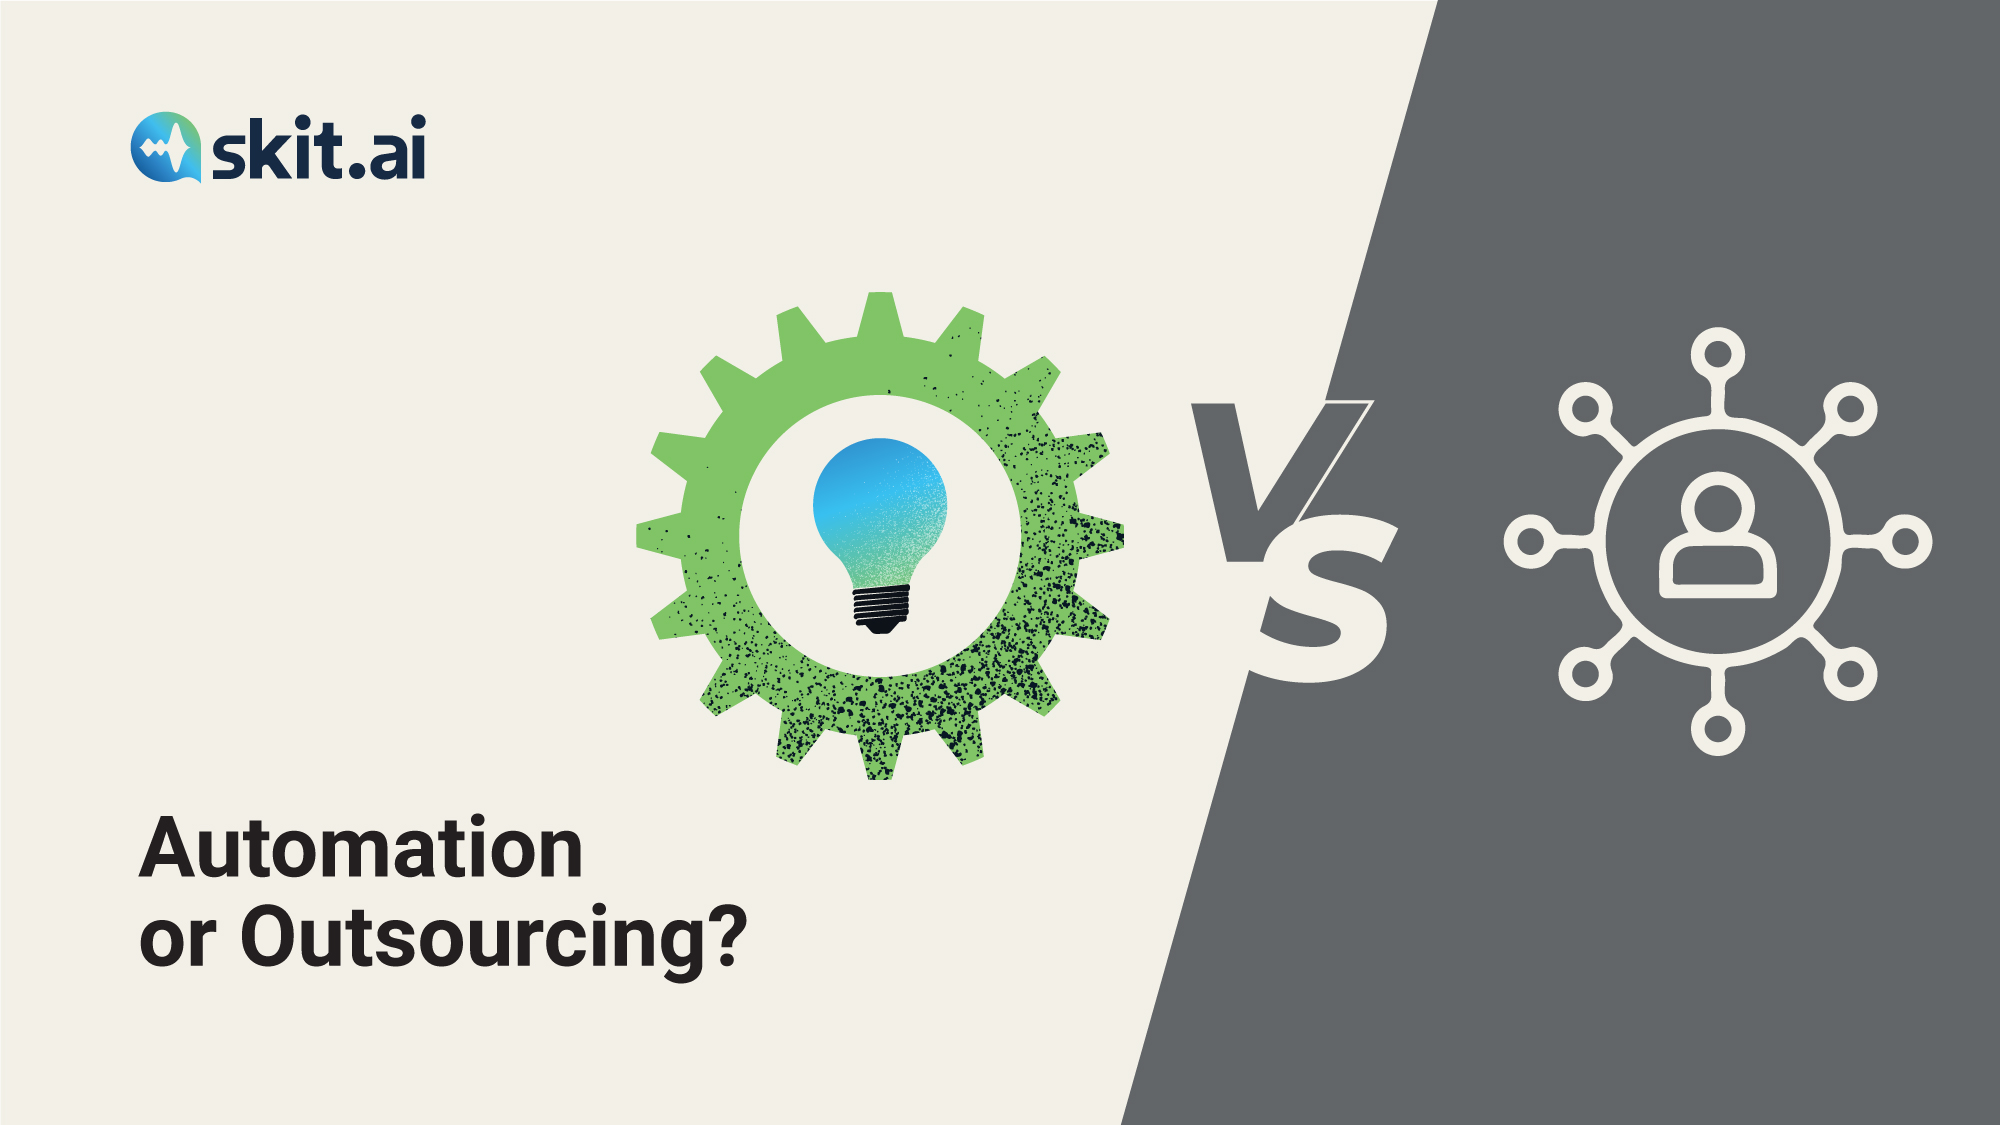 Contact Center Outsourcing vs. Contact Center Automation